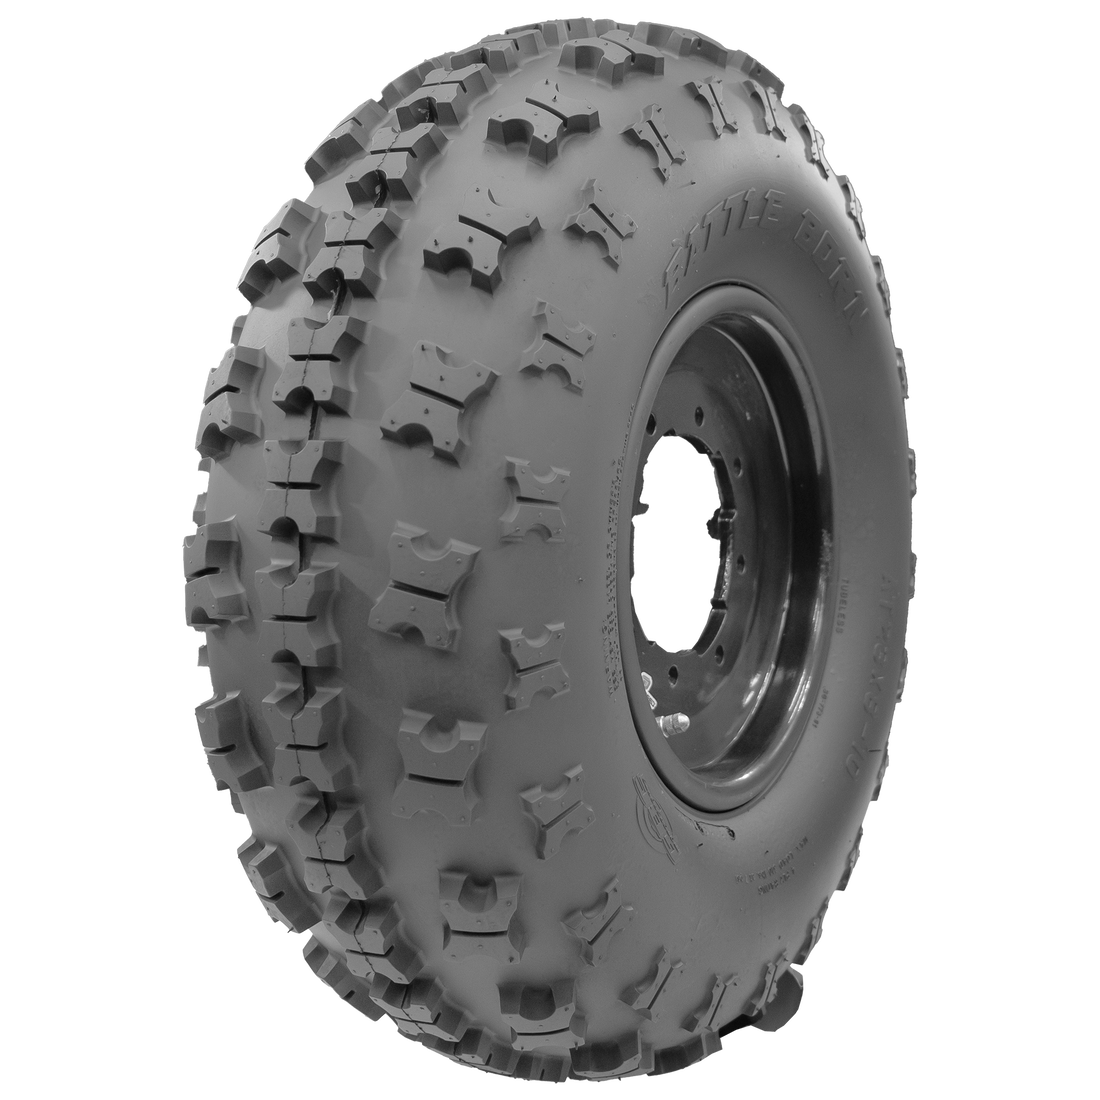 Angle view of the BATTLE BORN tire, highlighting the tread, a portion of the sidewall, and the rim. Specifically designed for Youth SXS vehicles, the tire exhibits the X-type lug pattern, optimized for both front and rear applications.